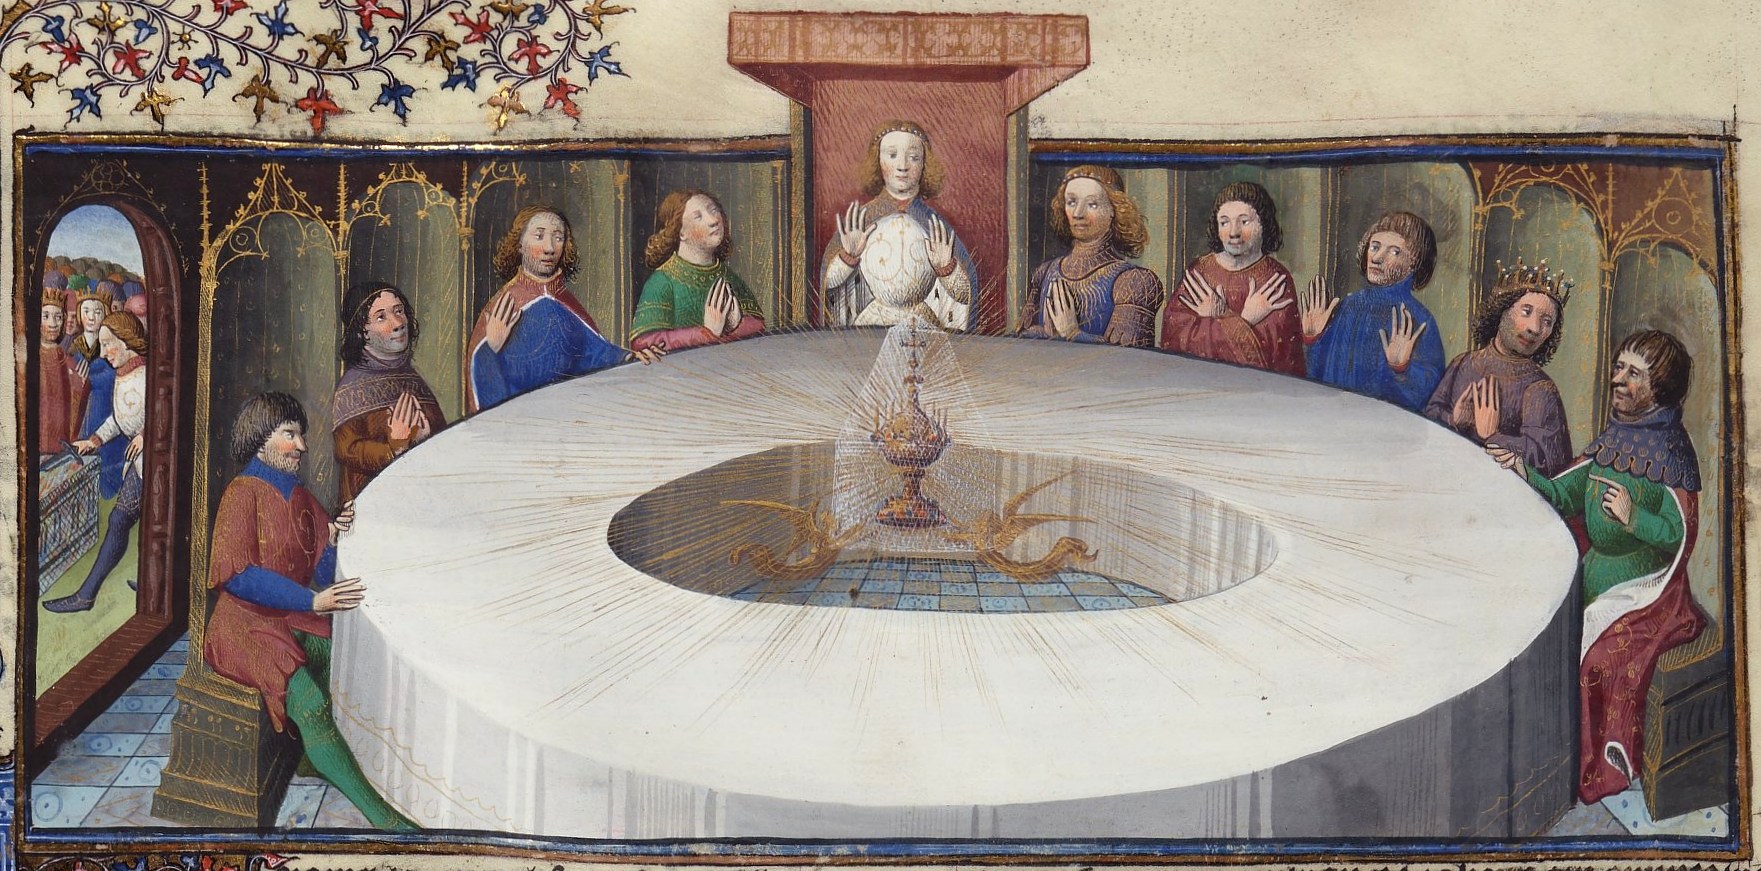 Holy Grail Round Table